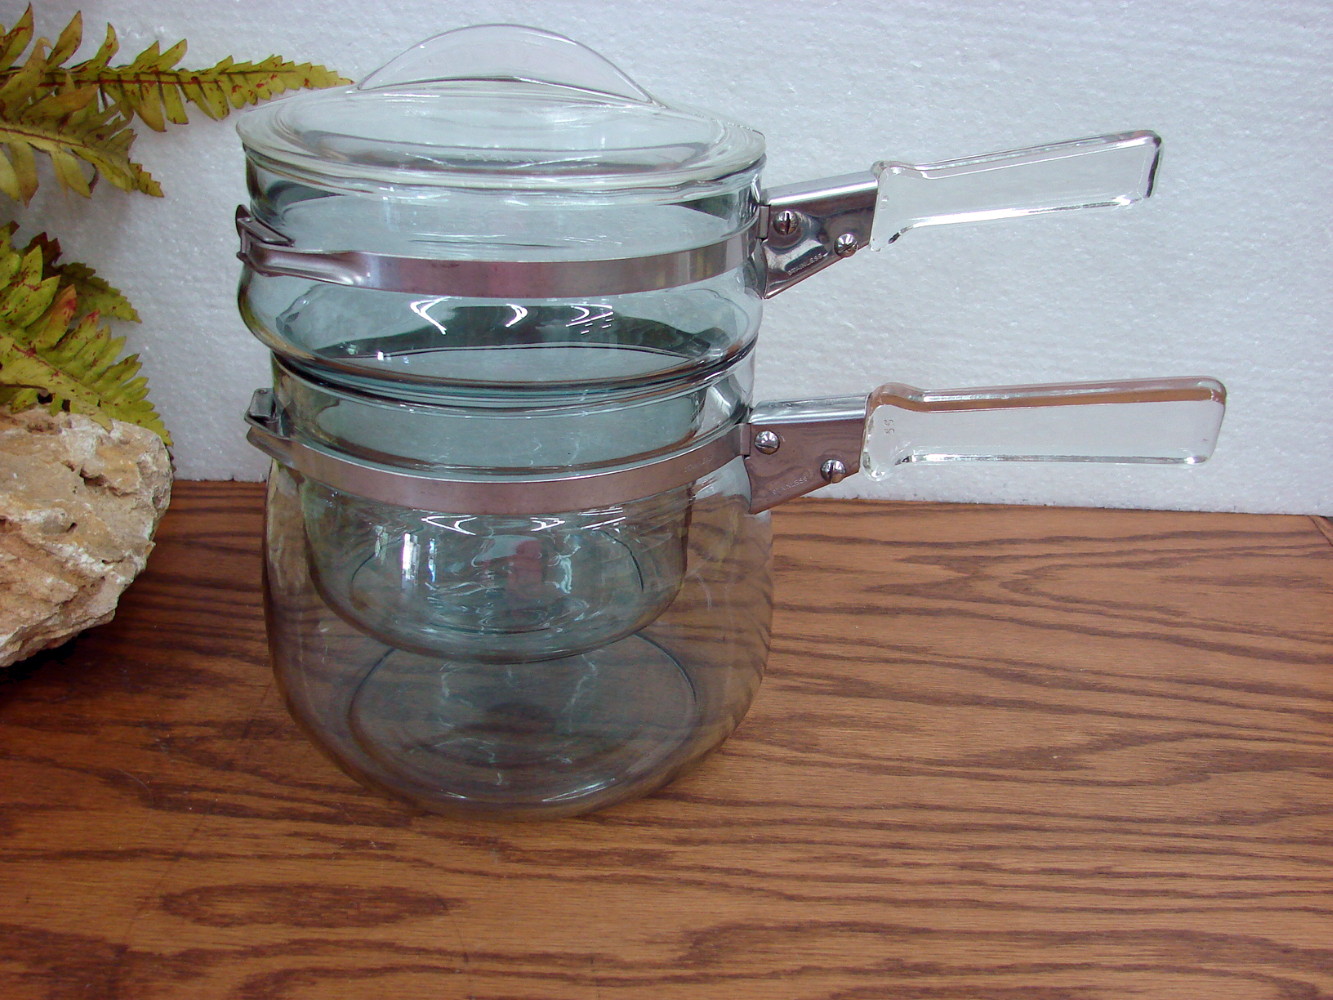 PYREX Flameware Clear Glass Saucepan Pot 6324-b 2 QT With Spout, Lid,  Handle and a Stainless Stell Band Made in USA 1950s 